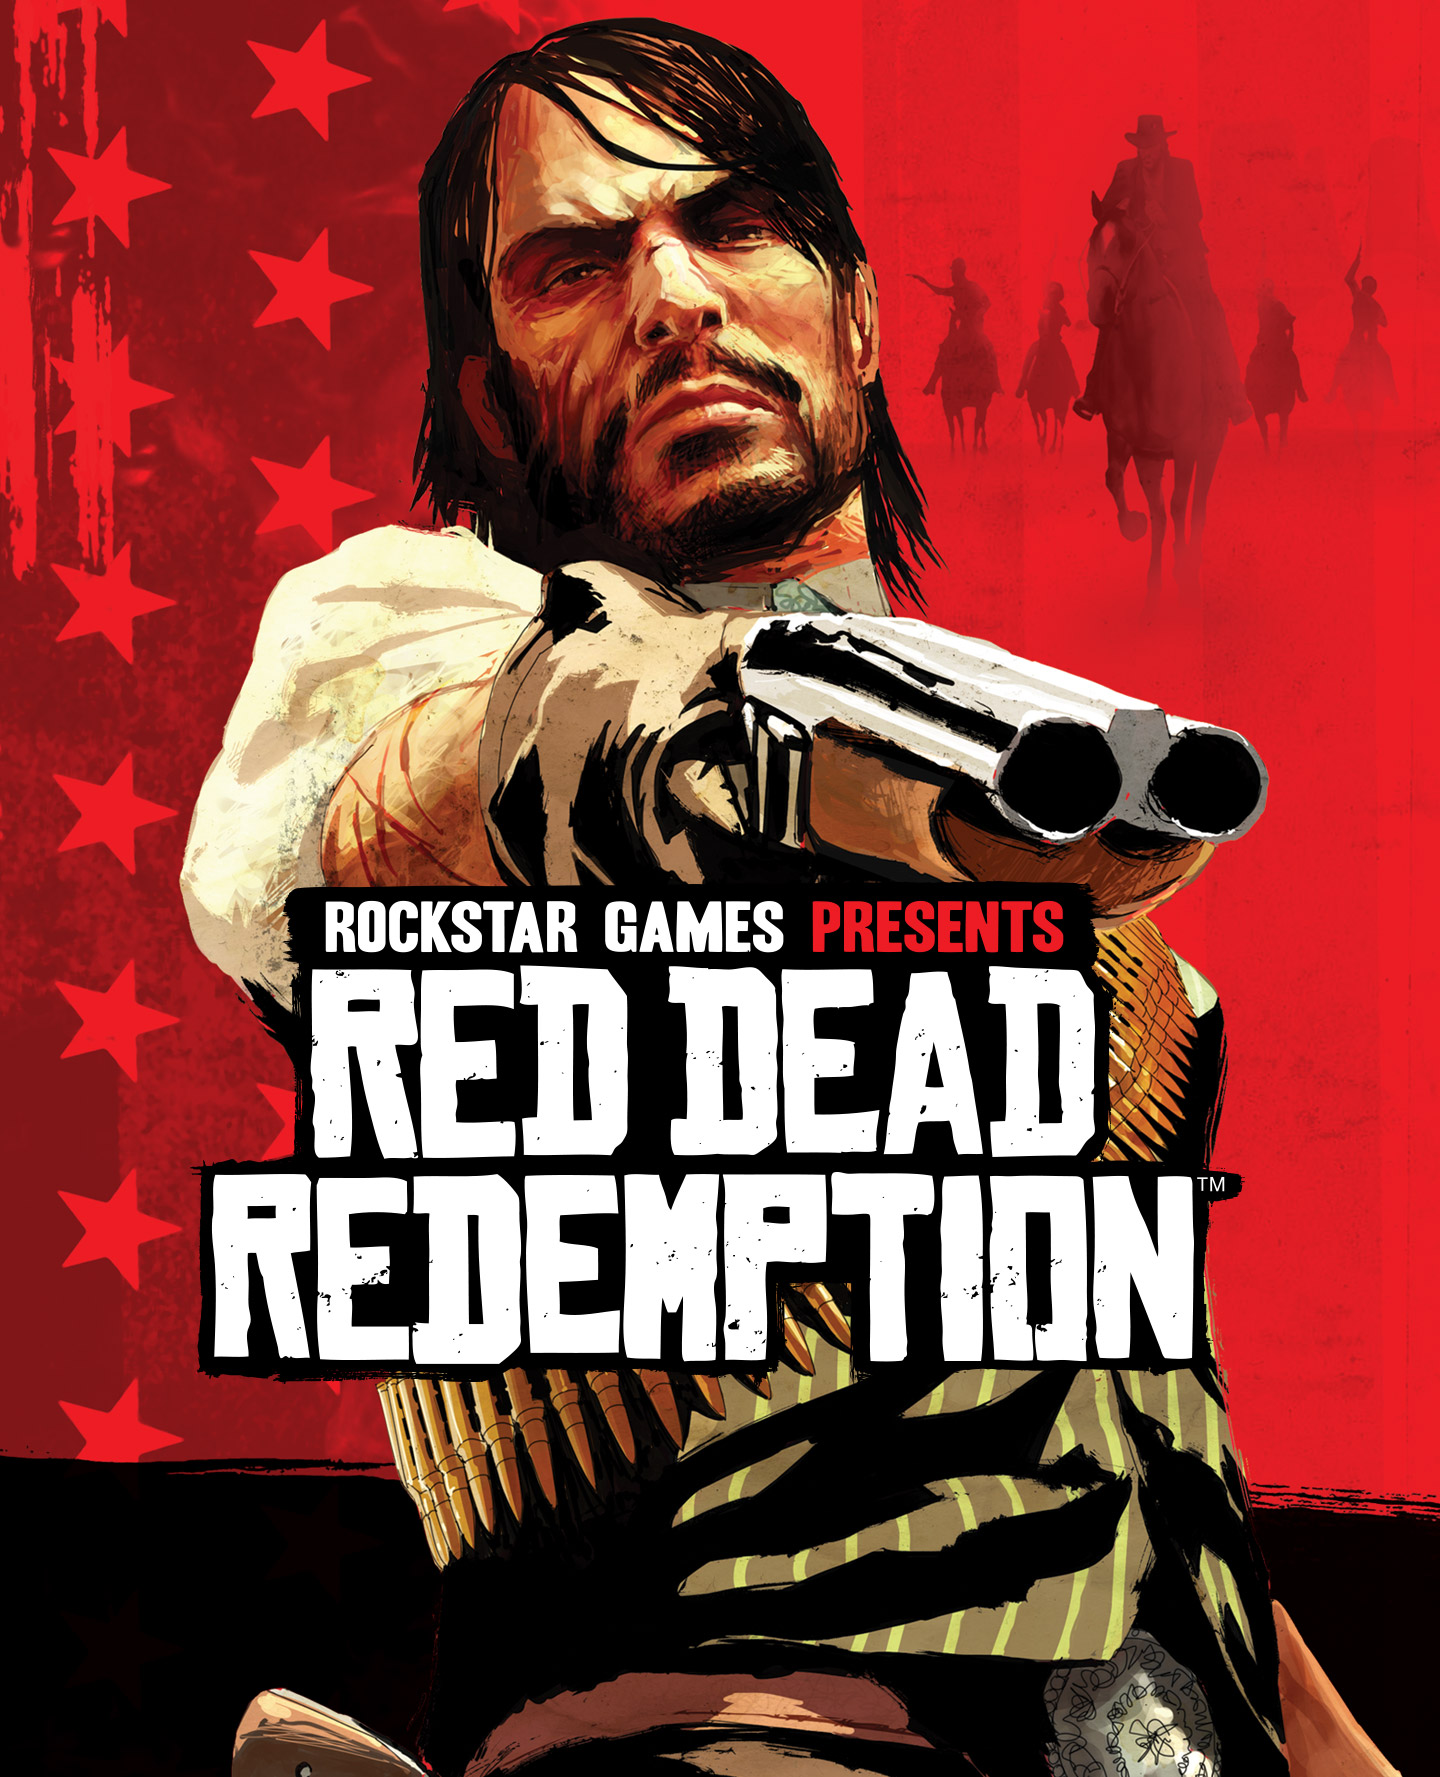 voorbeeld niveau Grace Red Dead Redemption Now Playable on Xbox One with Backward Compatibility -  Rockstar Games